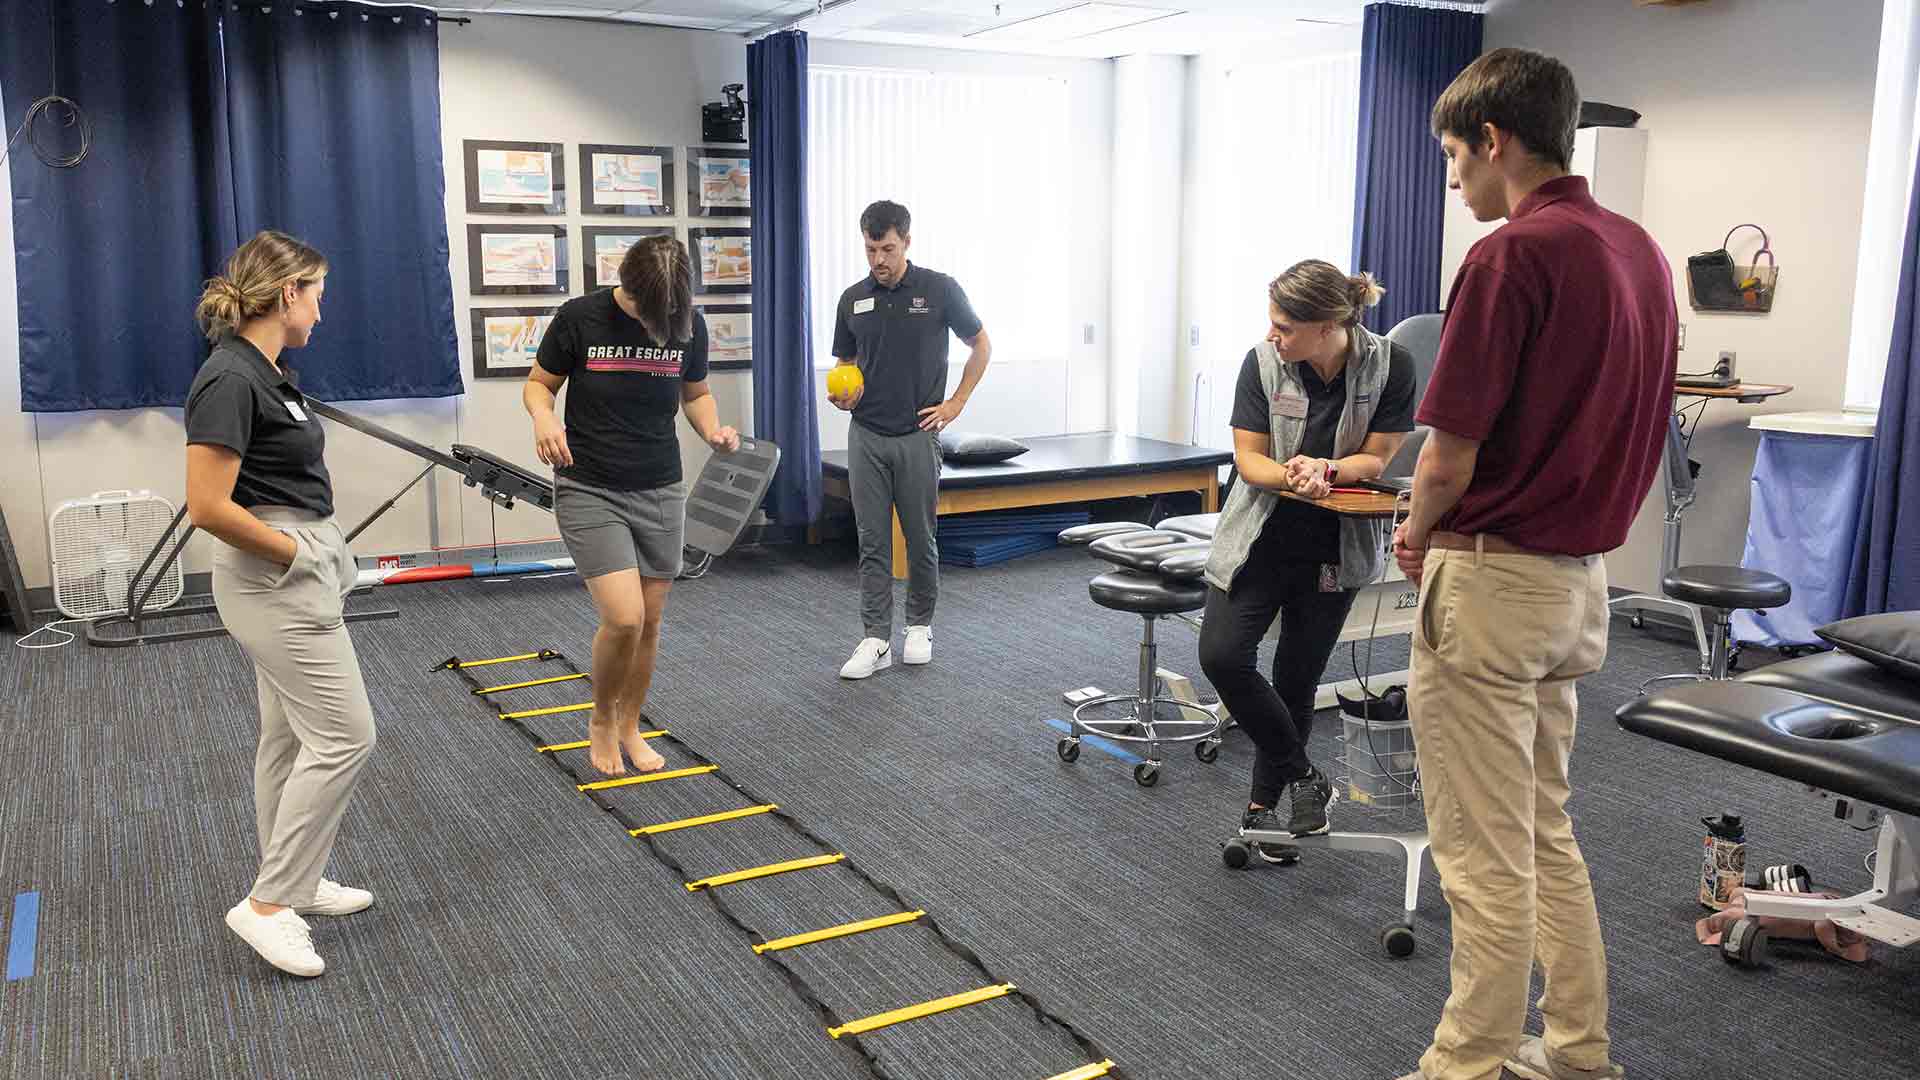 Physical therapy students and a professor guiding a young client through a rehab activity.